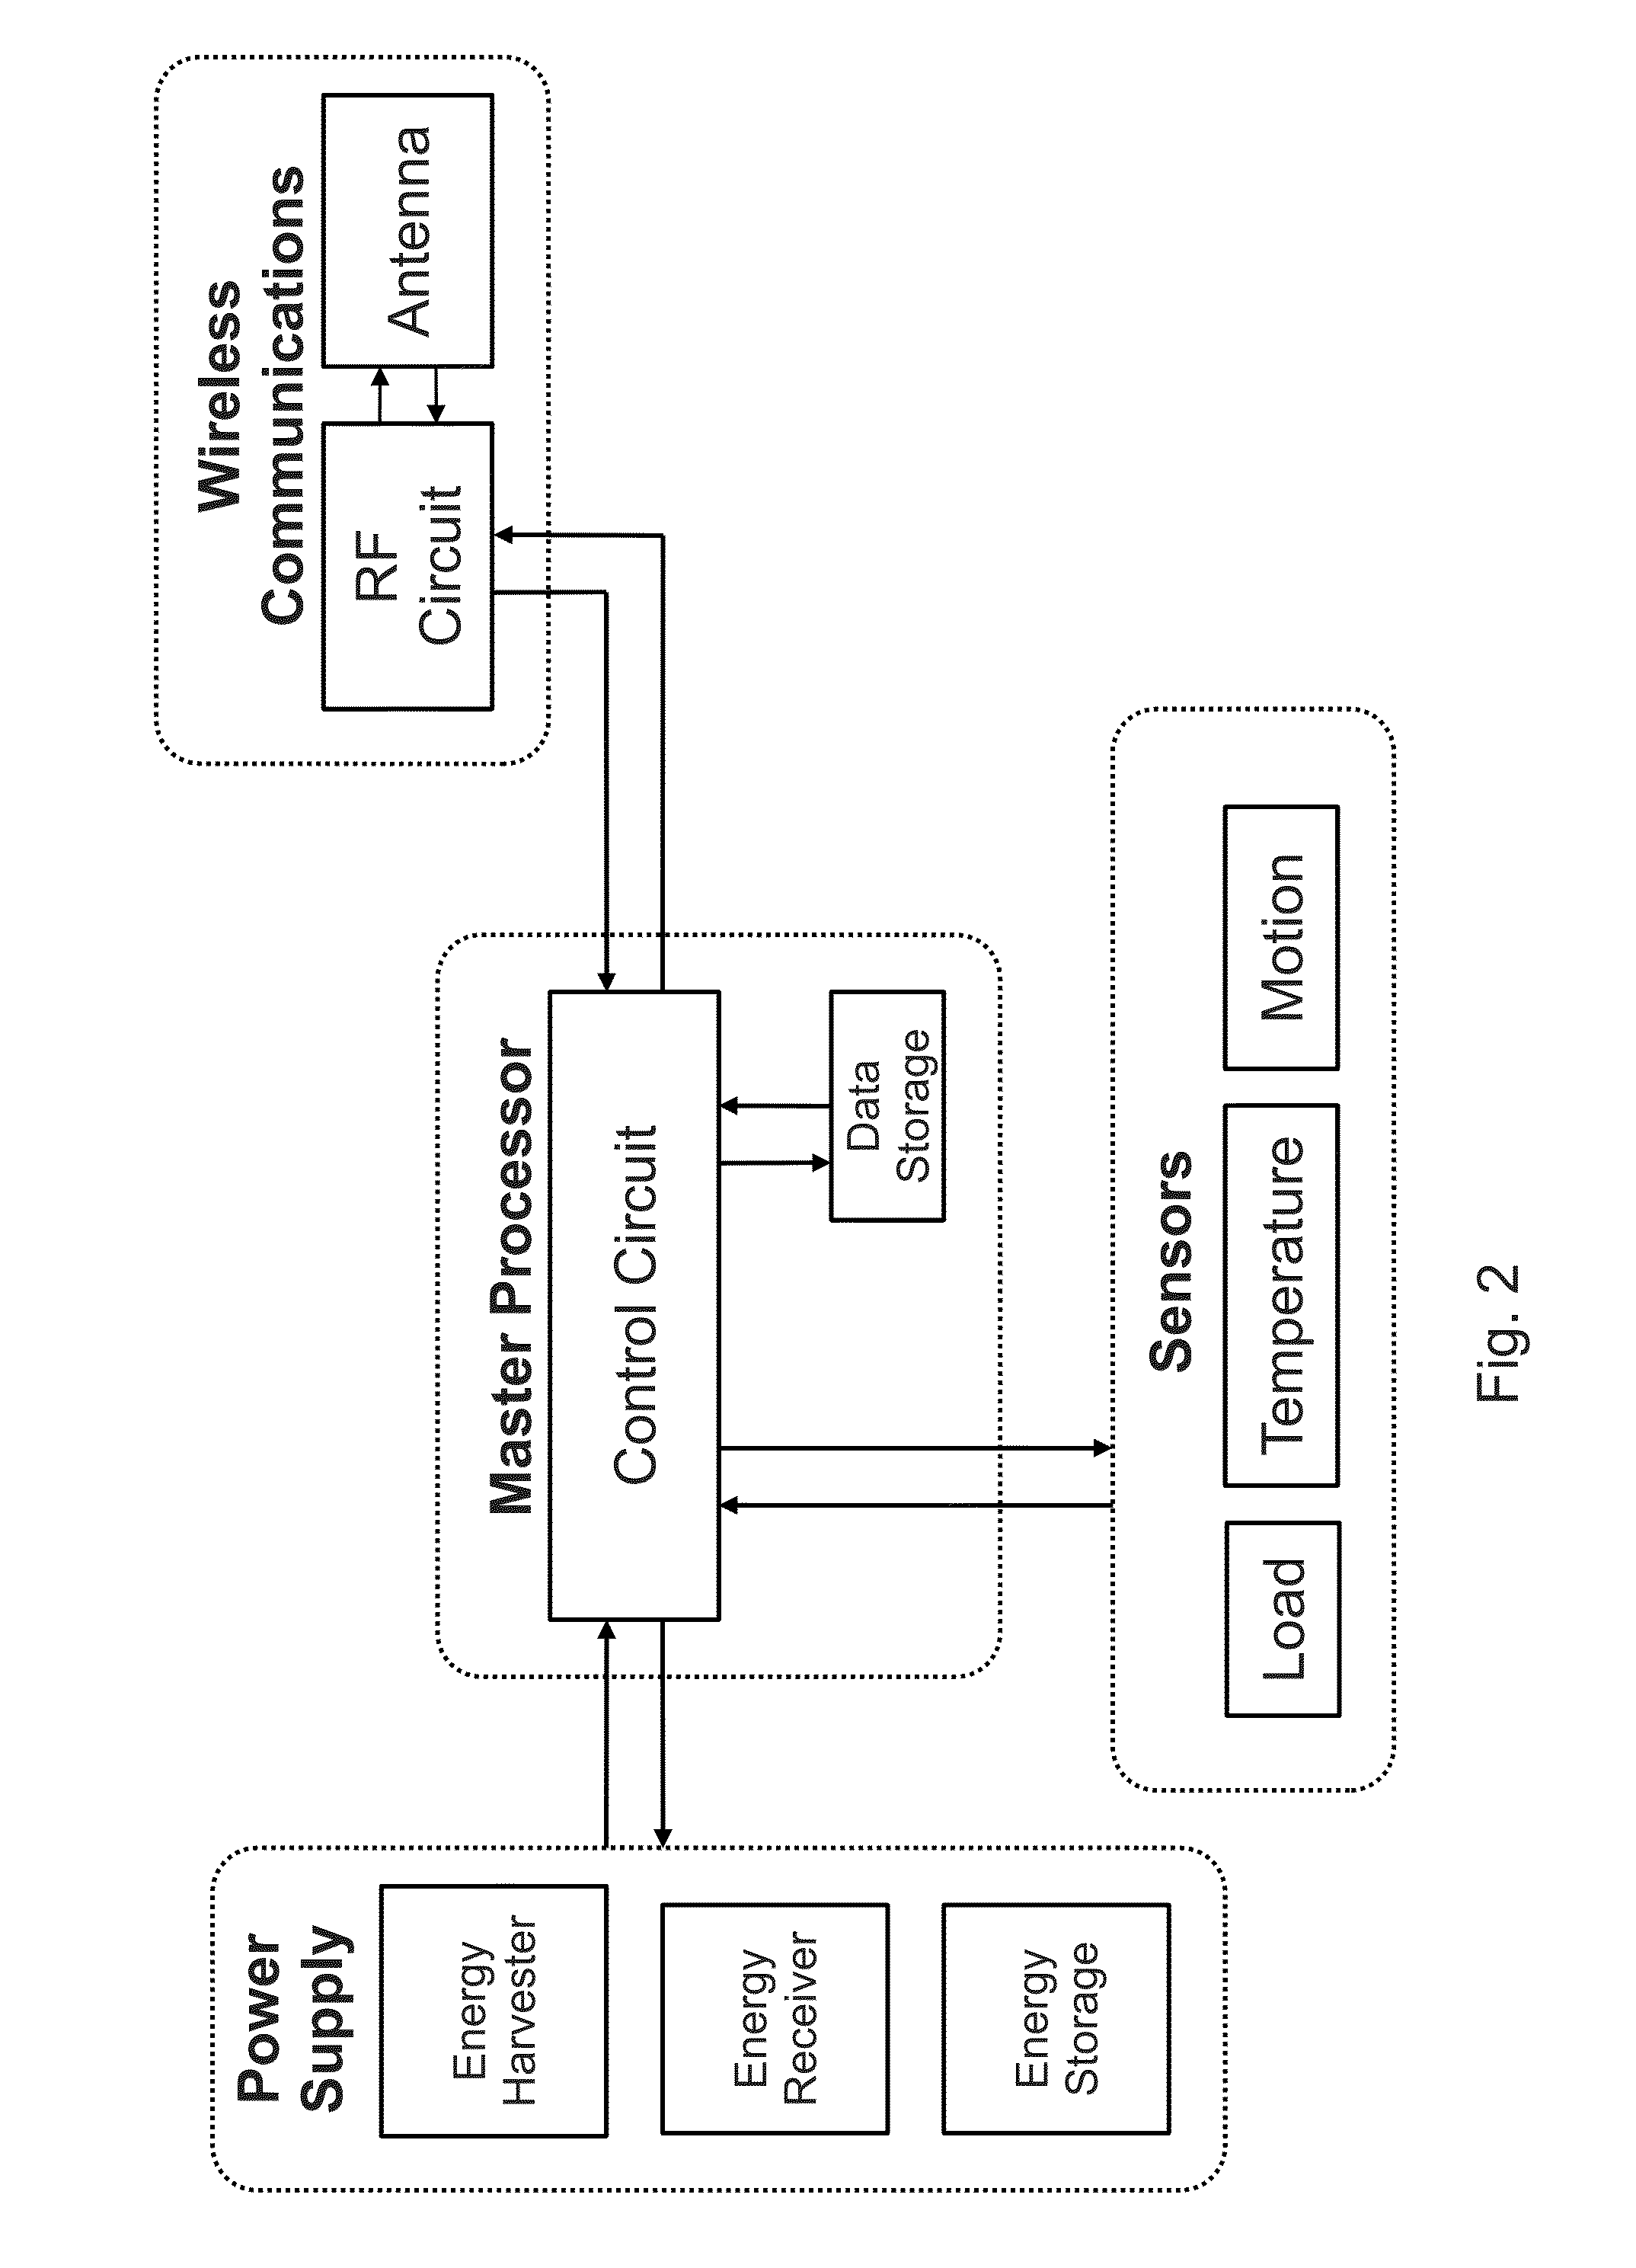 Internal structural monitoring system